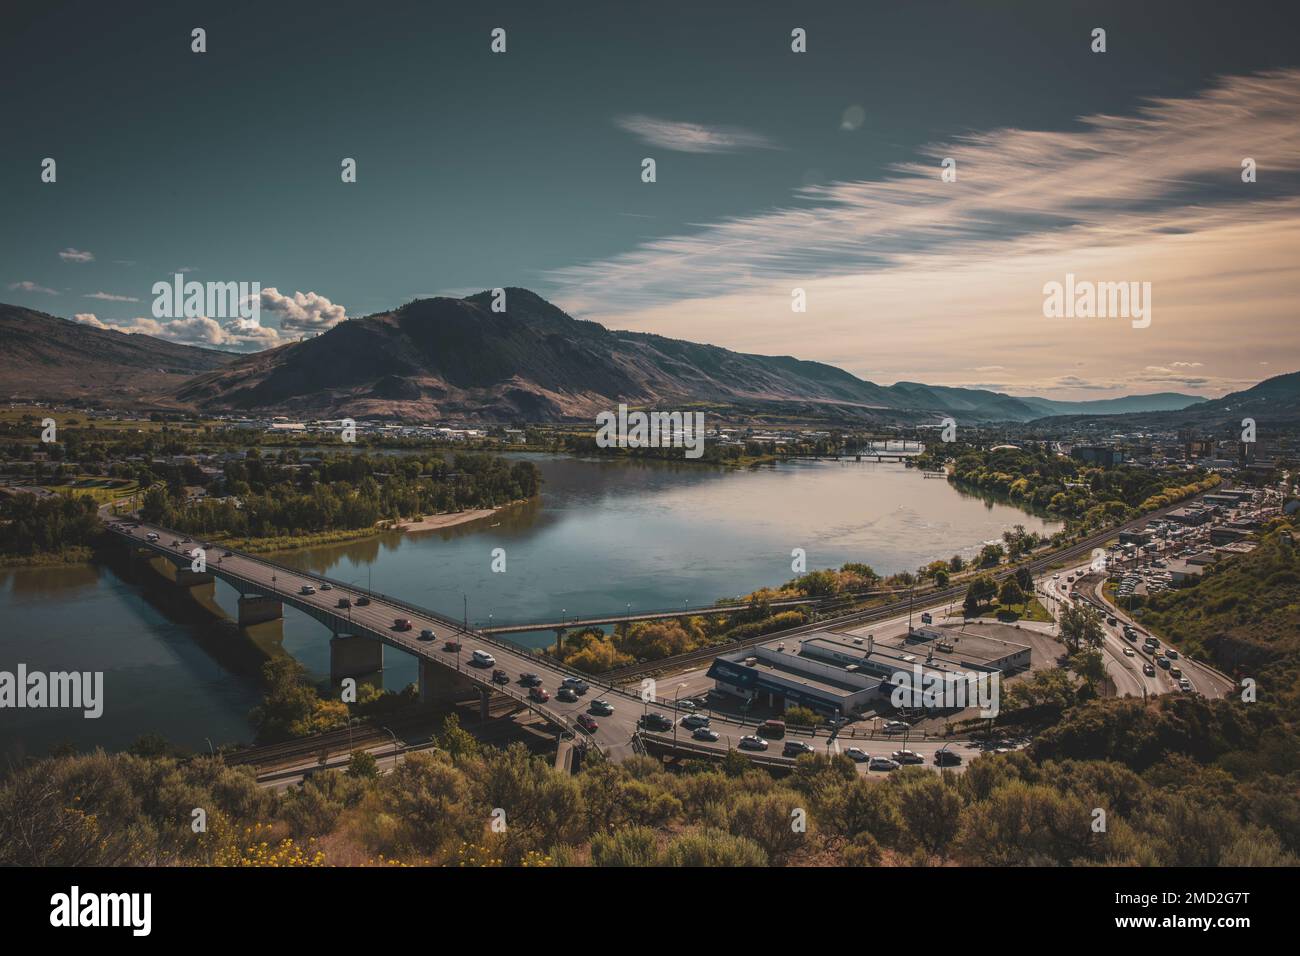 myKamloops: The official citizen application for Kamloops, BC.